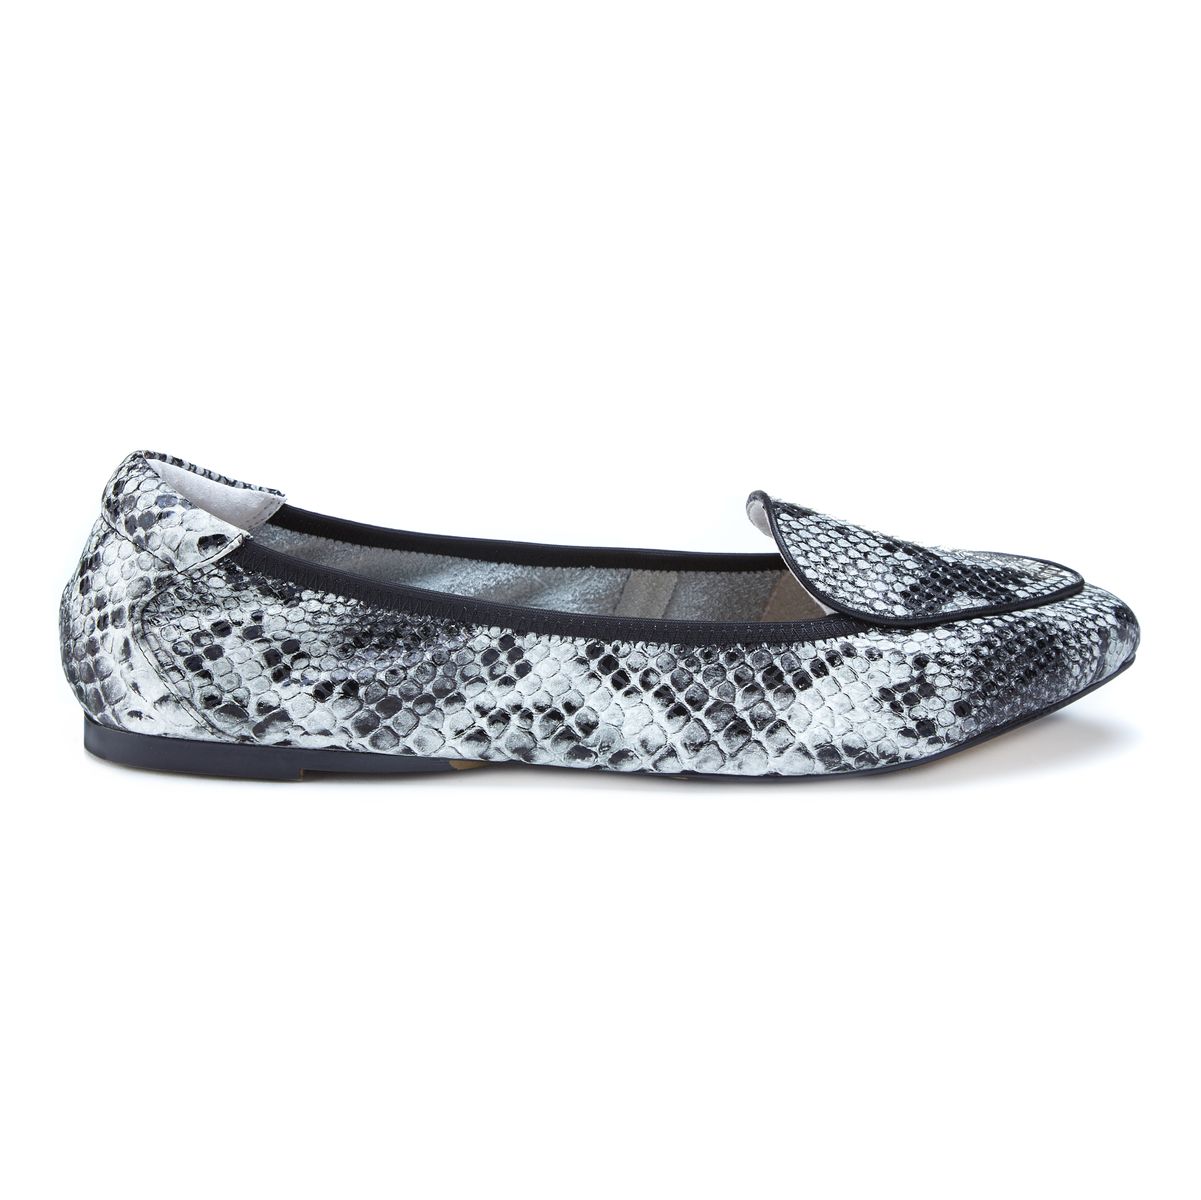 Cocorose London Grey Snake Print printed leather loafers